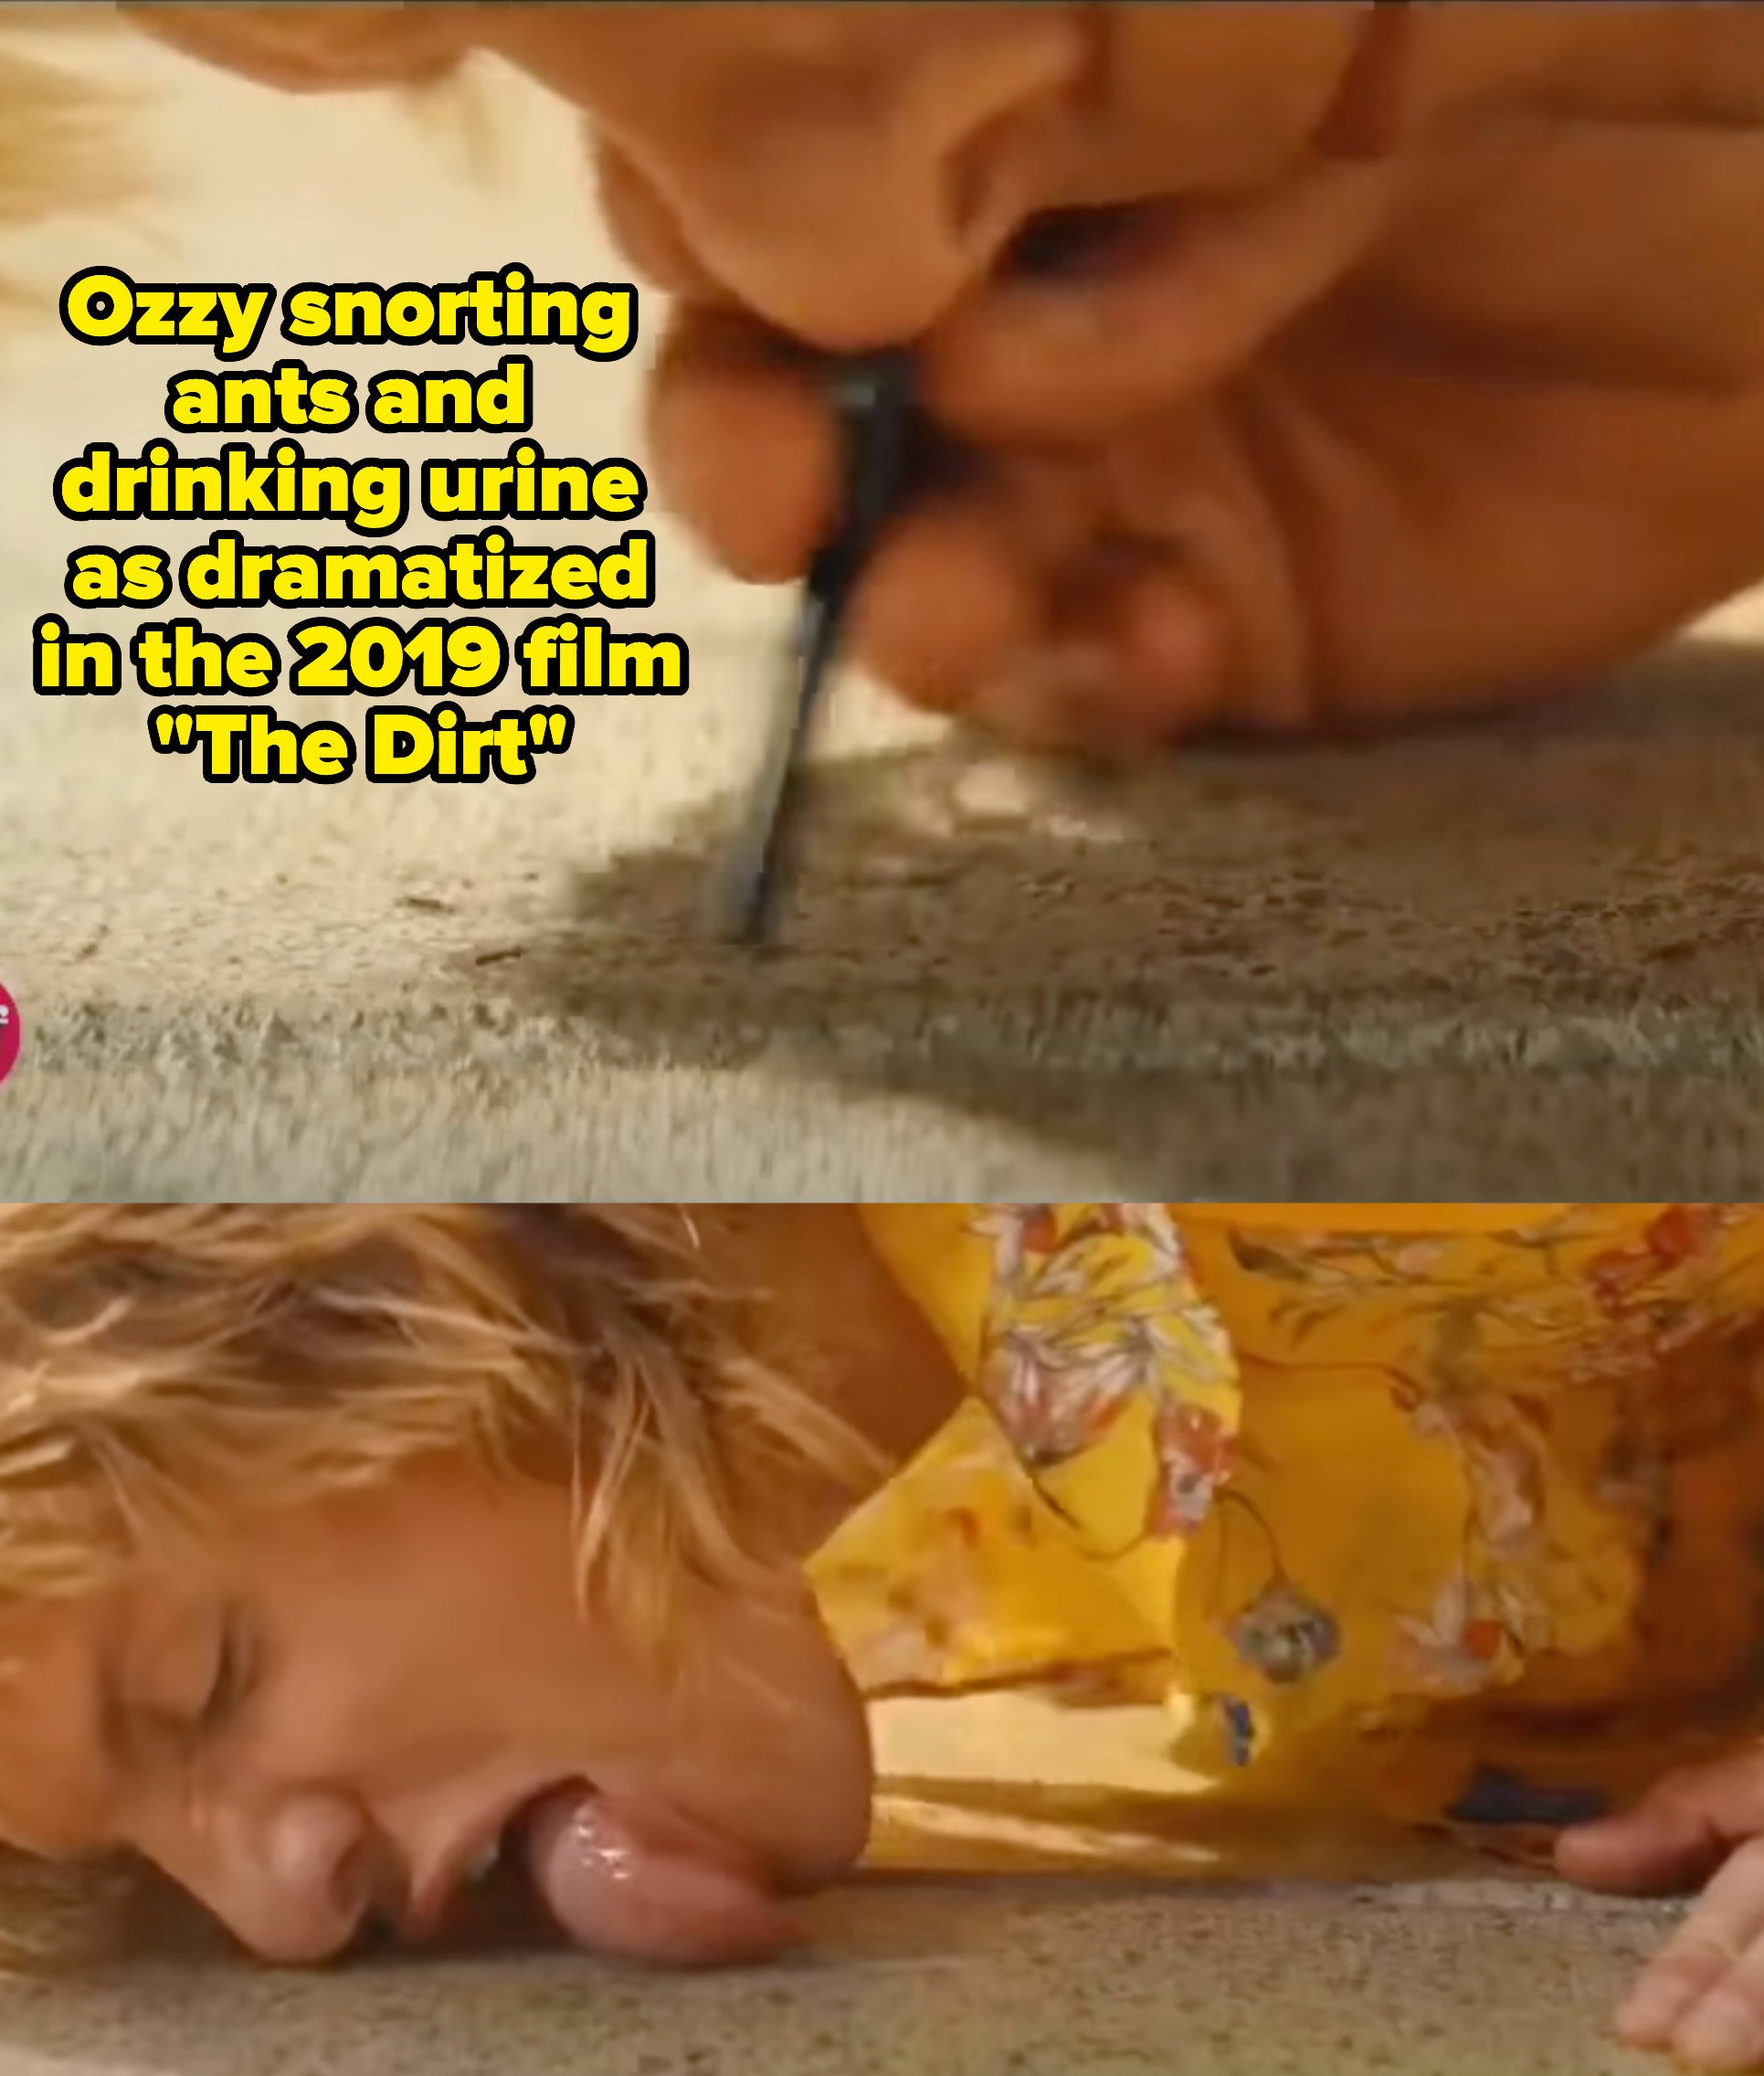 An actor portraying Ozzy drinks his own urine and snorts ants in the 2019 film the dirt